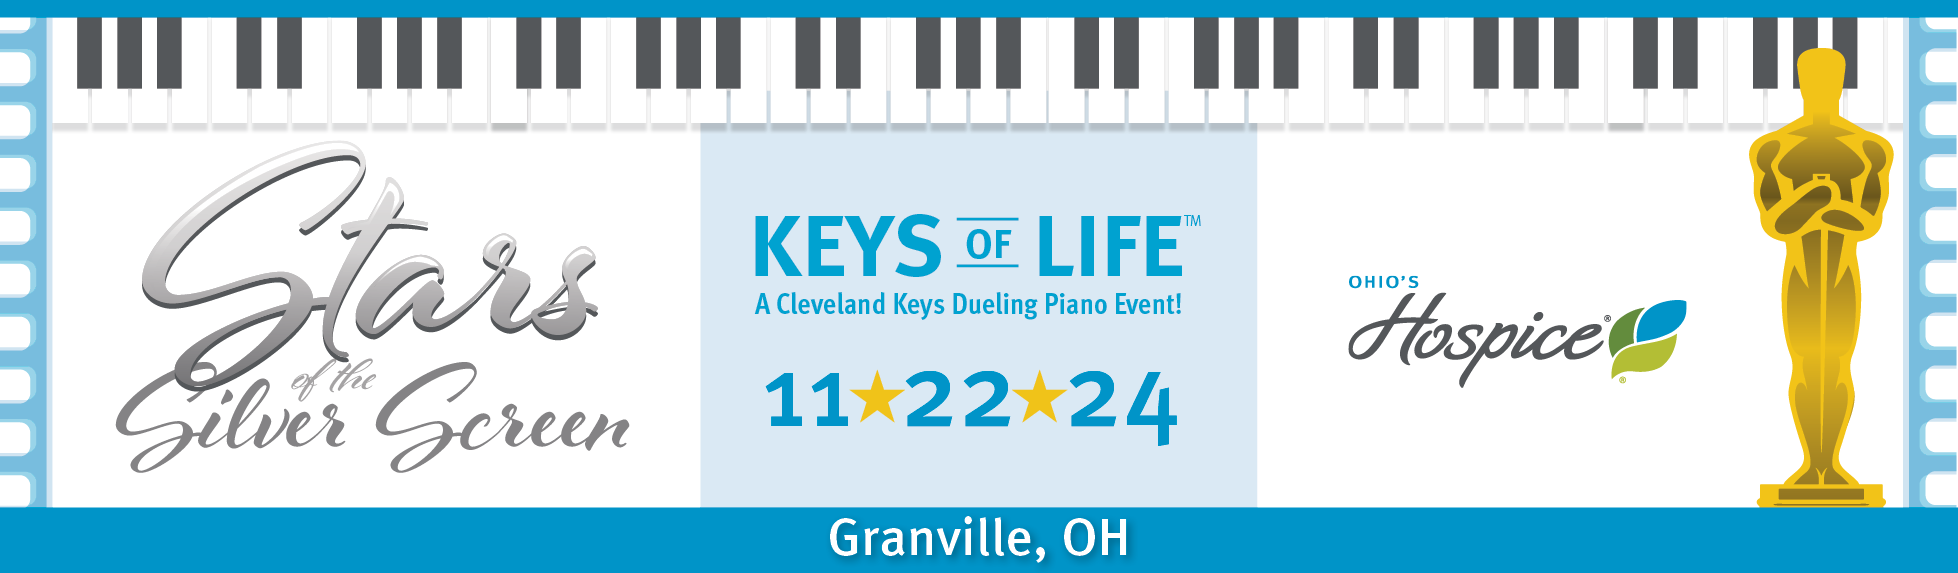 Ohio's Hospice of Central Ohio Keys of Life 11.22.24 Granville, OH